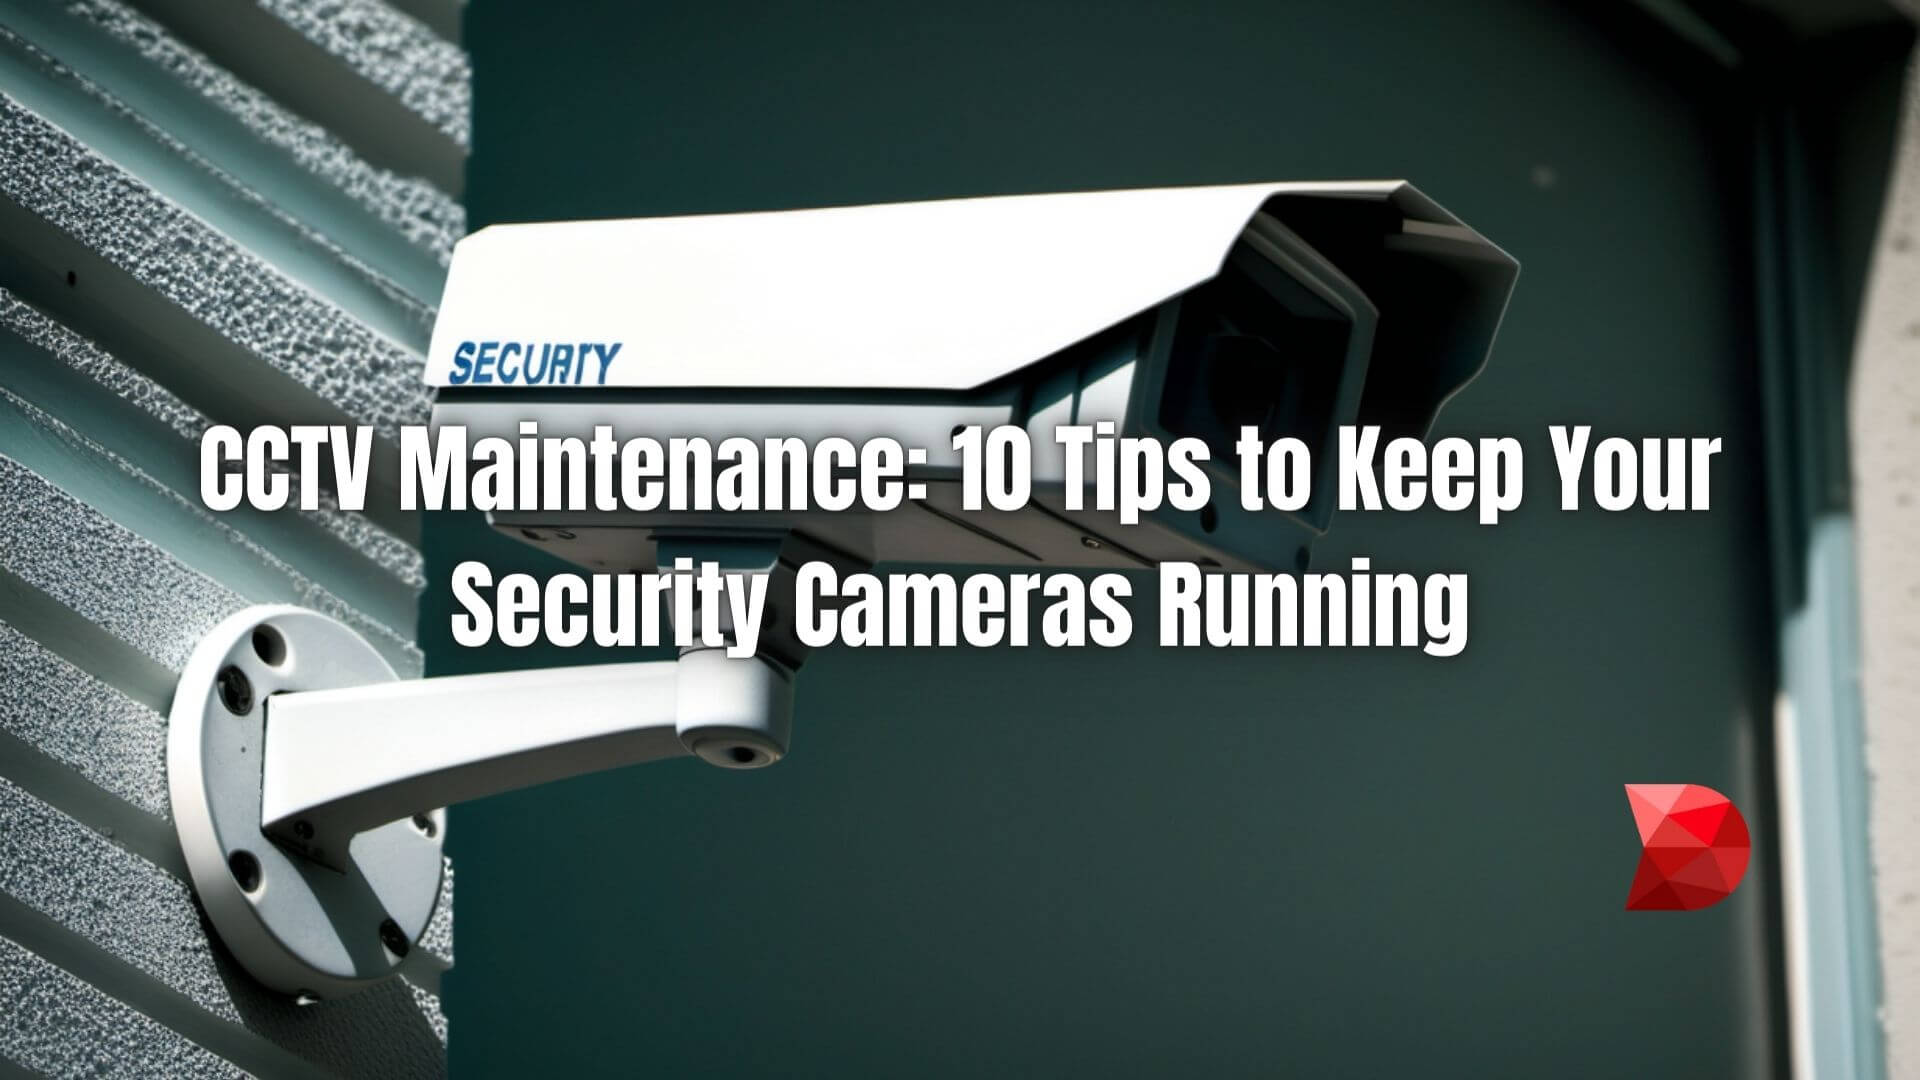 Enhance security camera longevity! Click here to learn 10 vital tips for effective CCTV maintenance in this comprehensive guide.